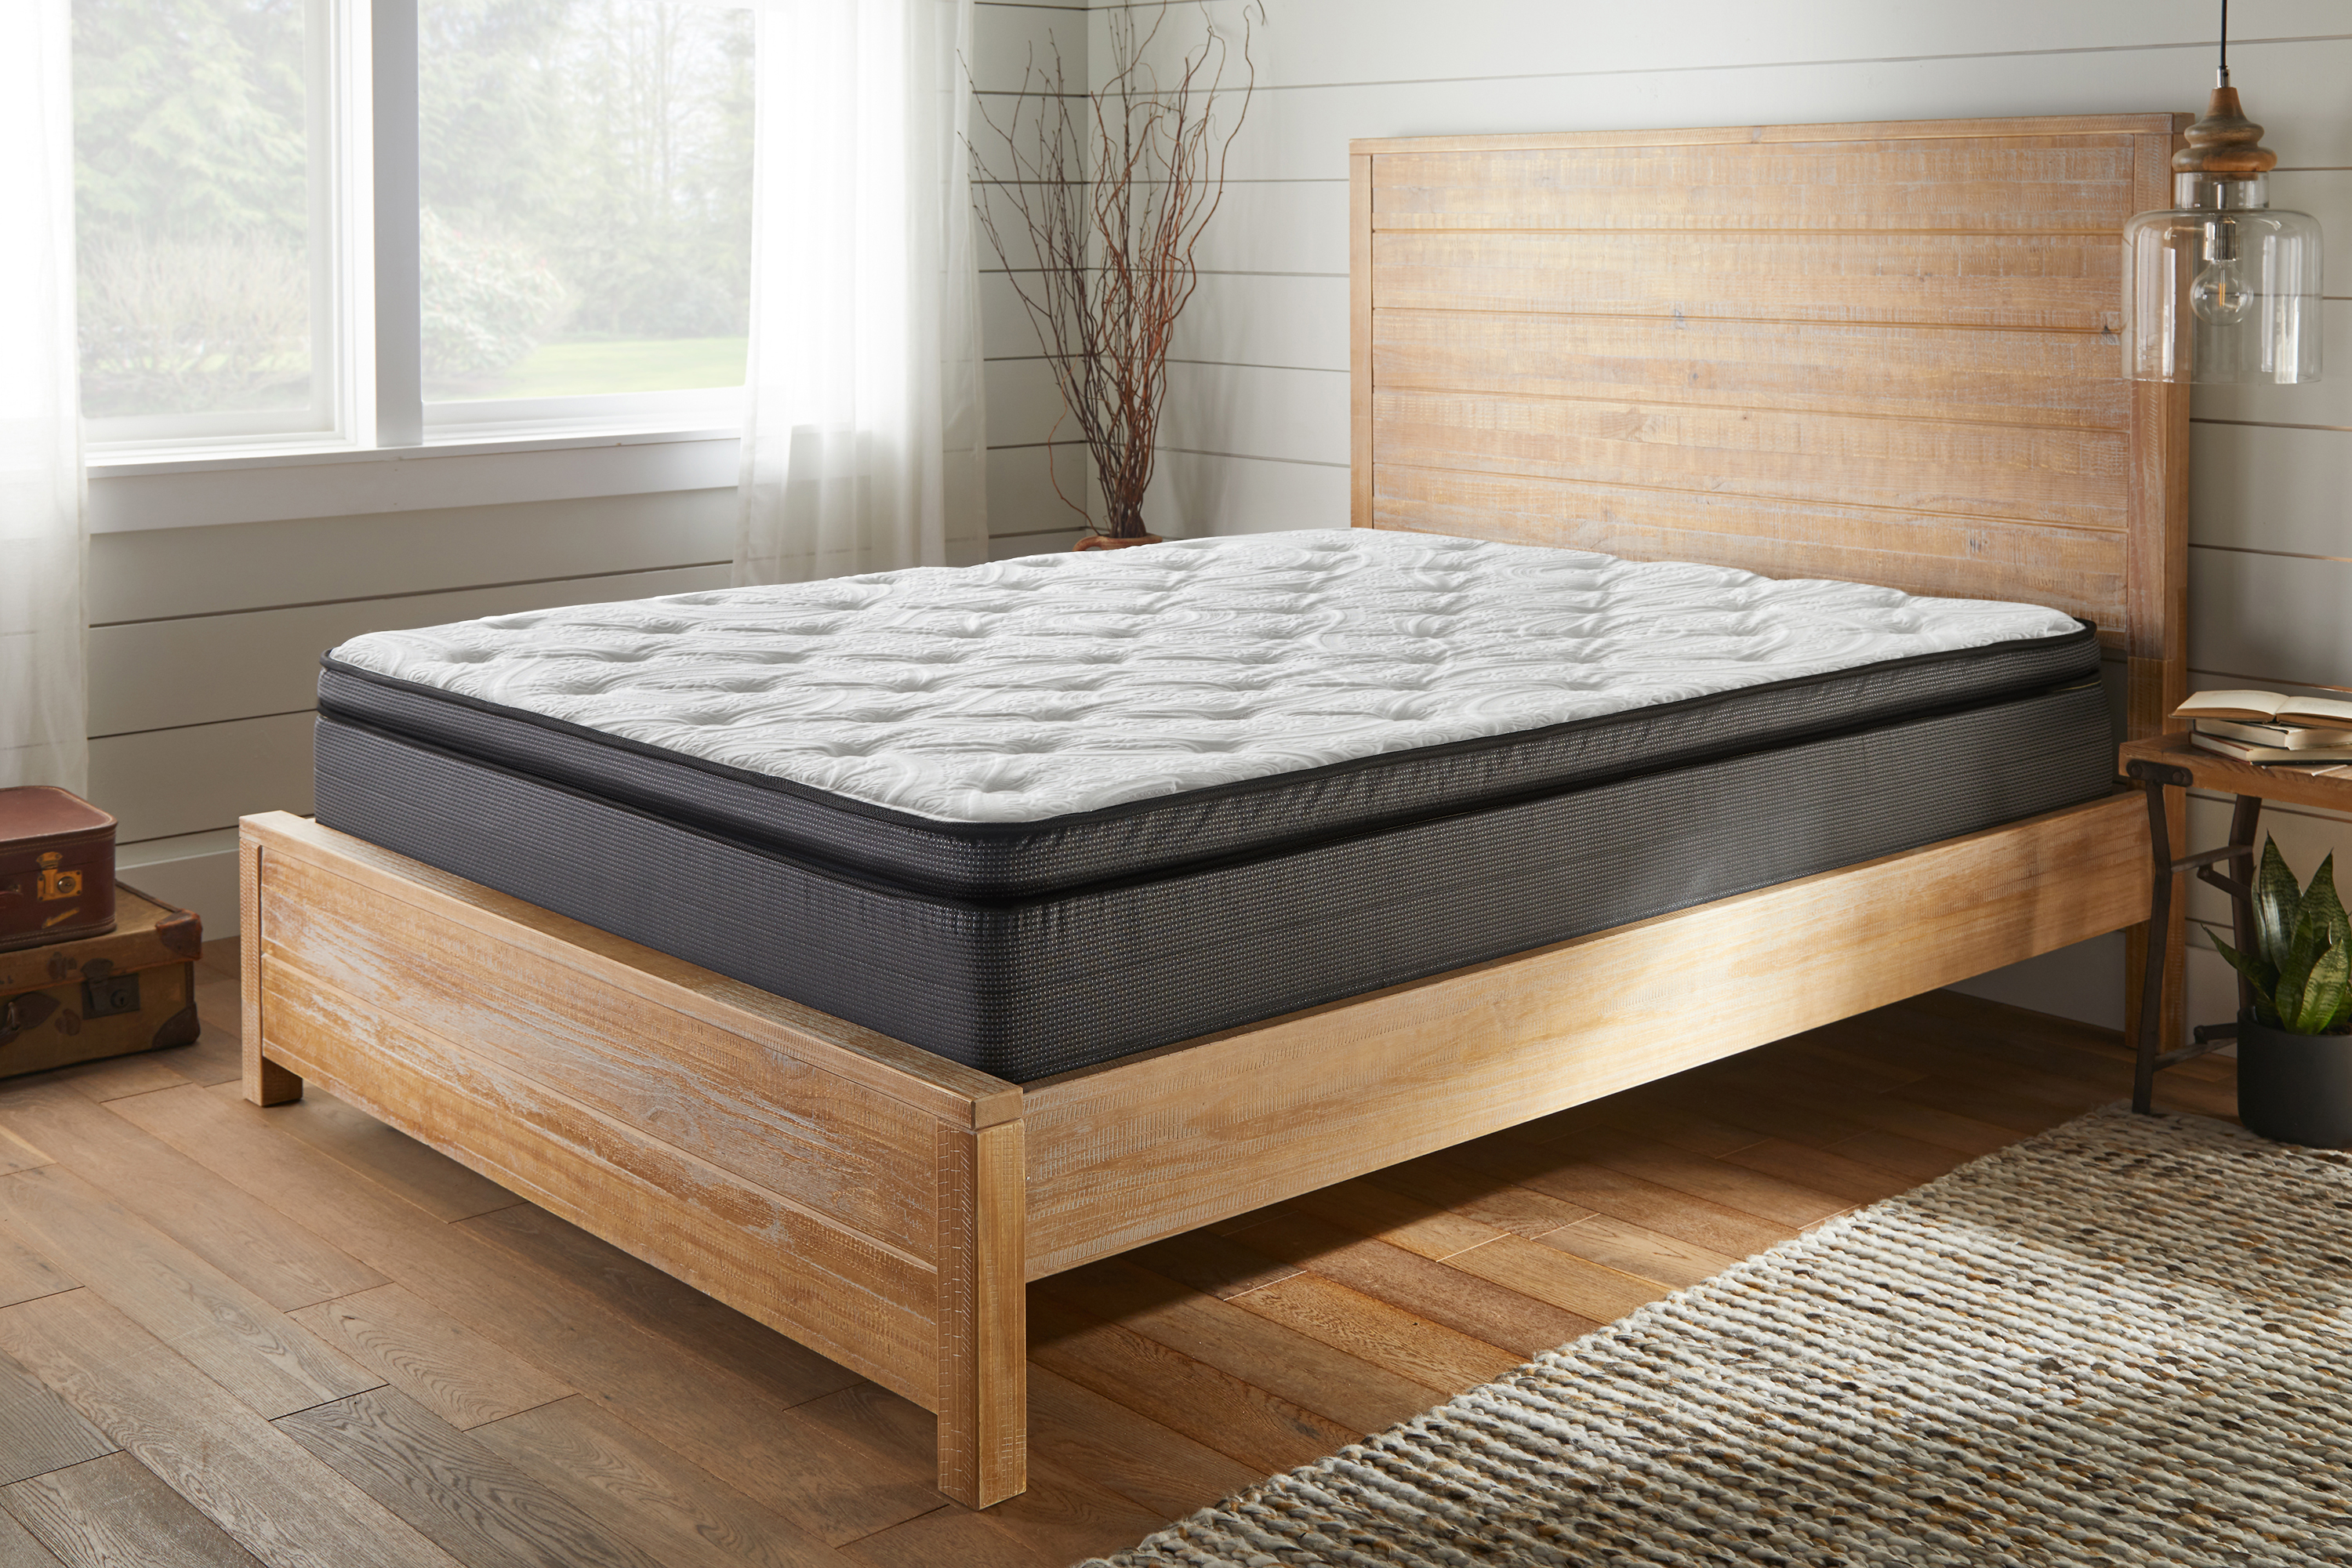 review of american bedding mattresses